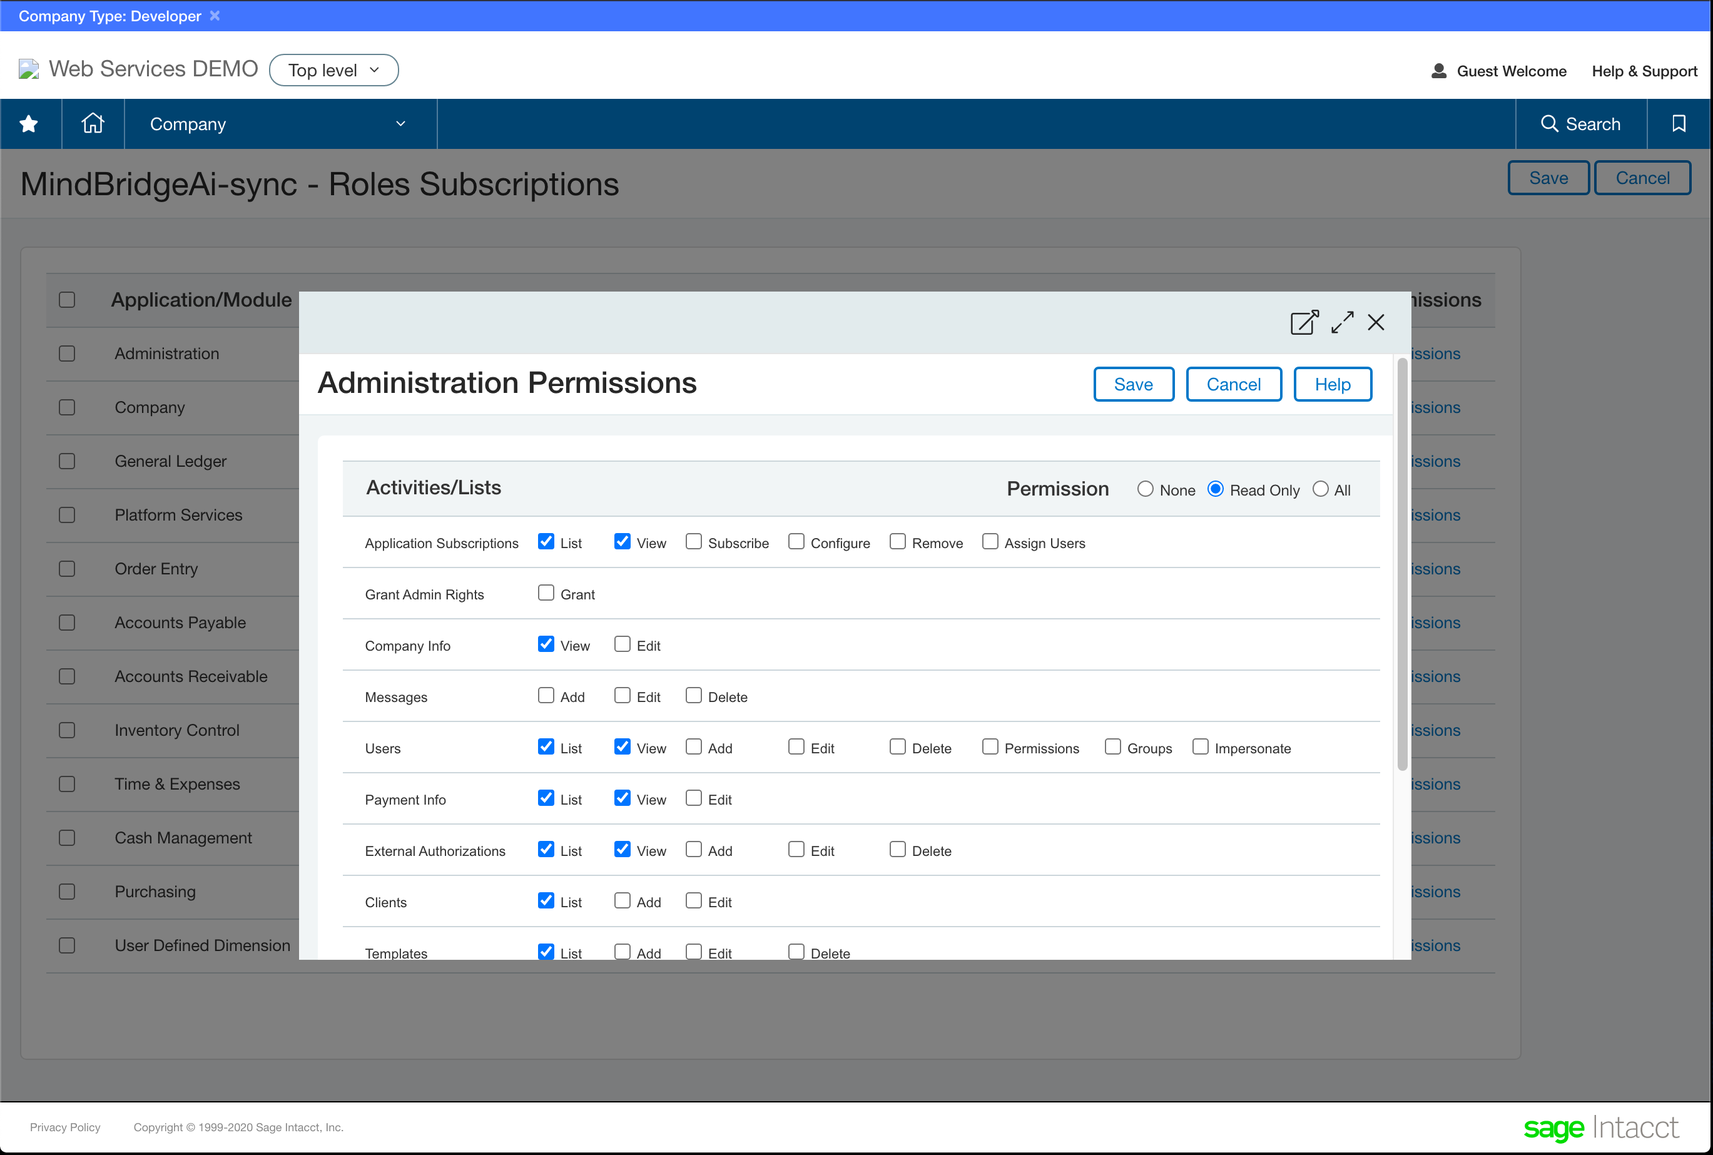 intacct administration permissions screen